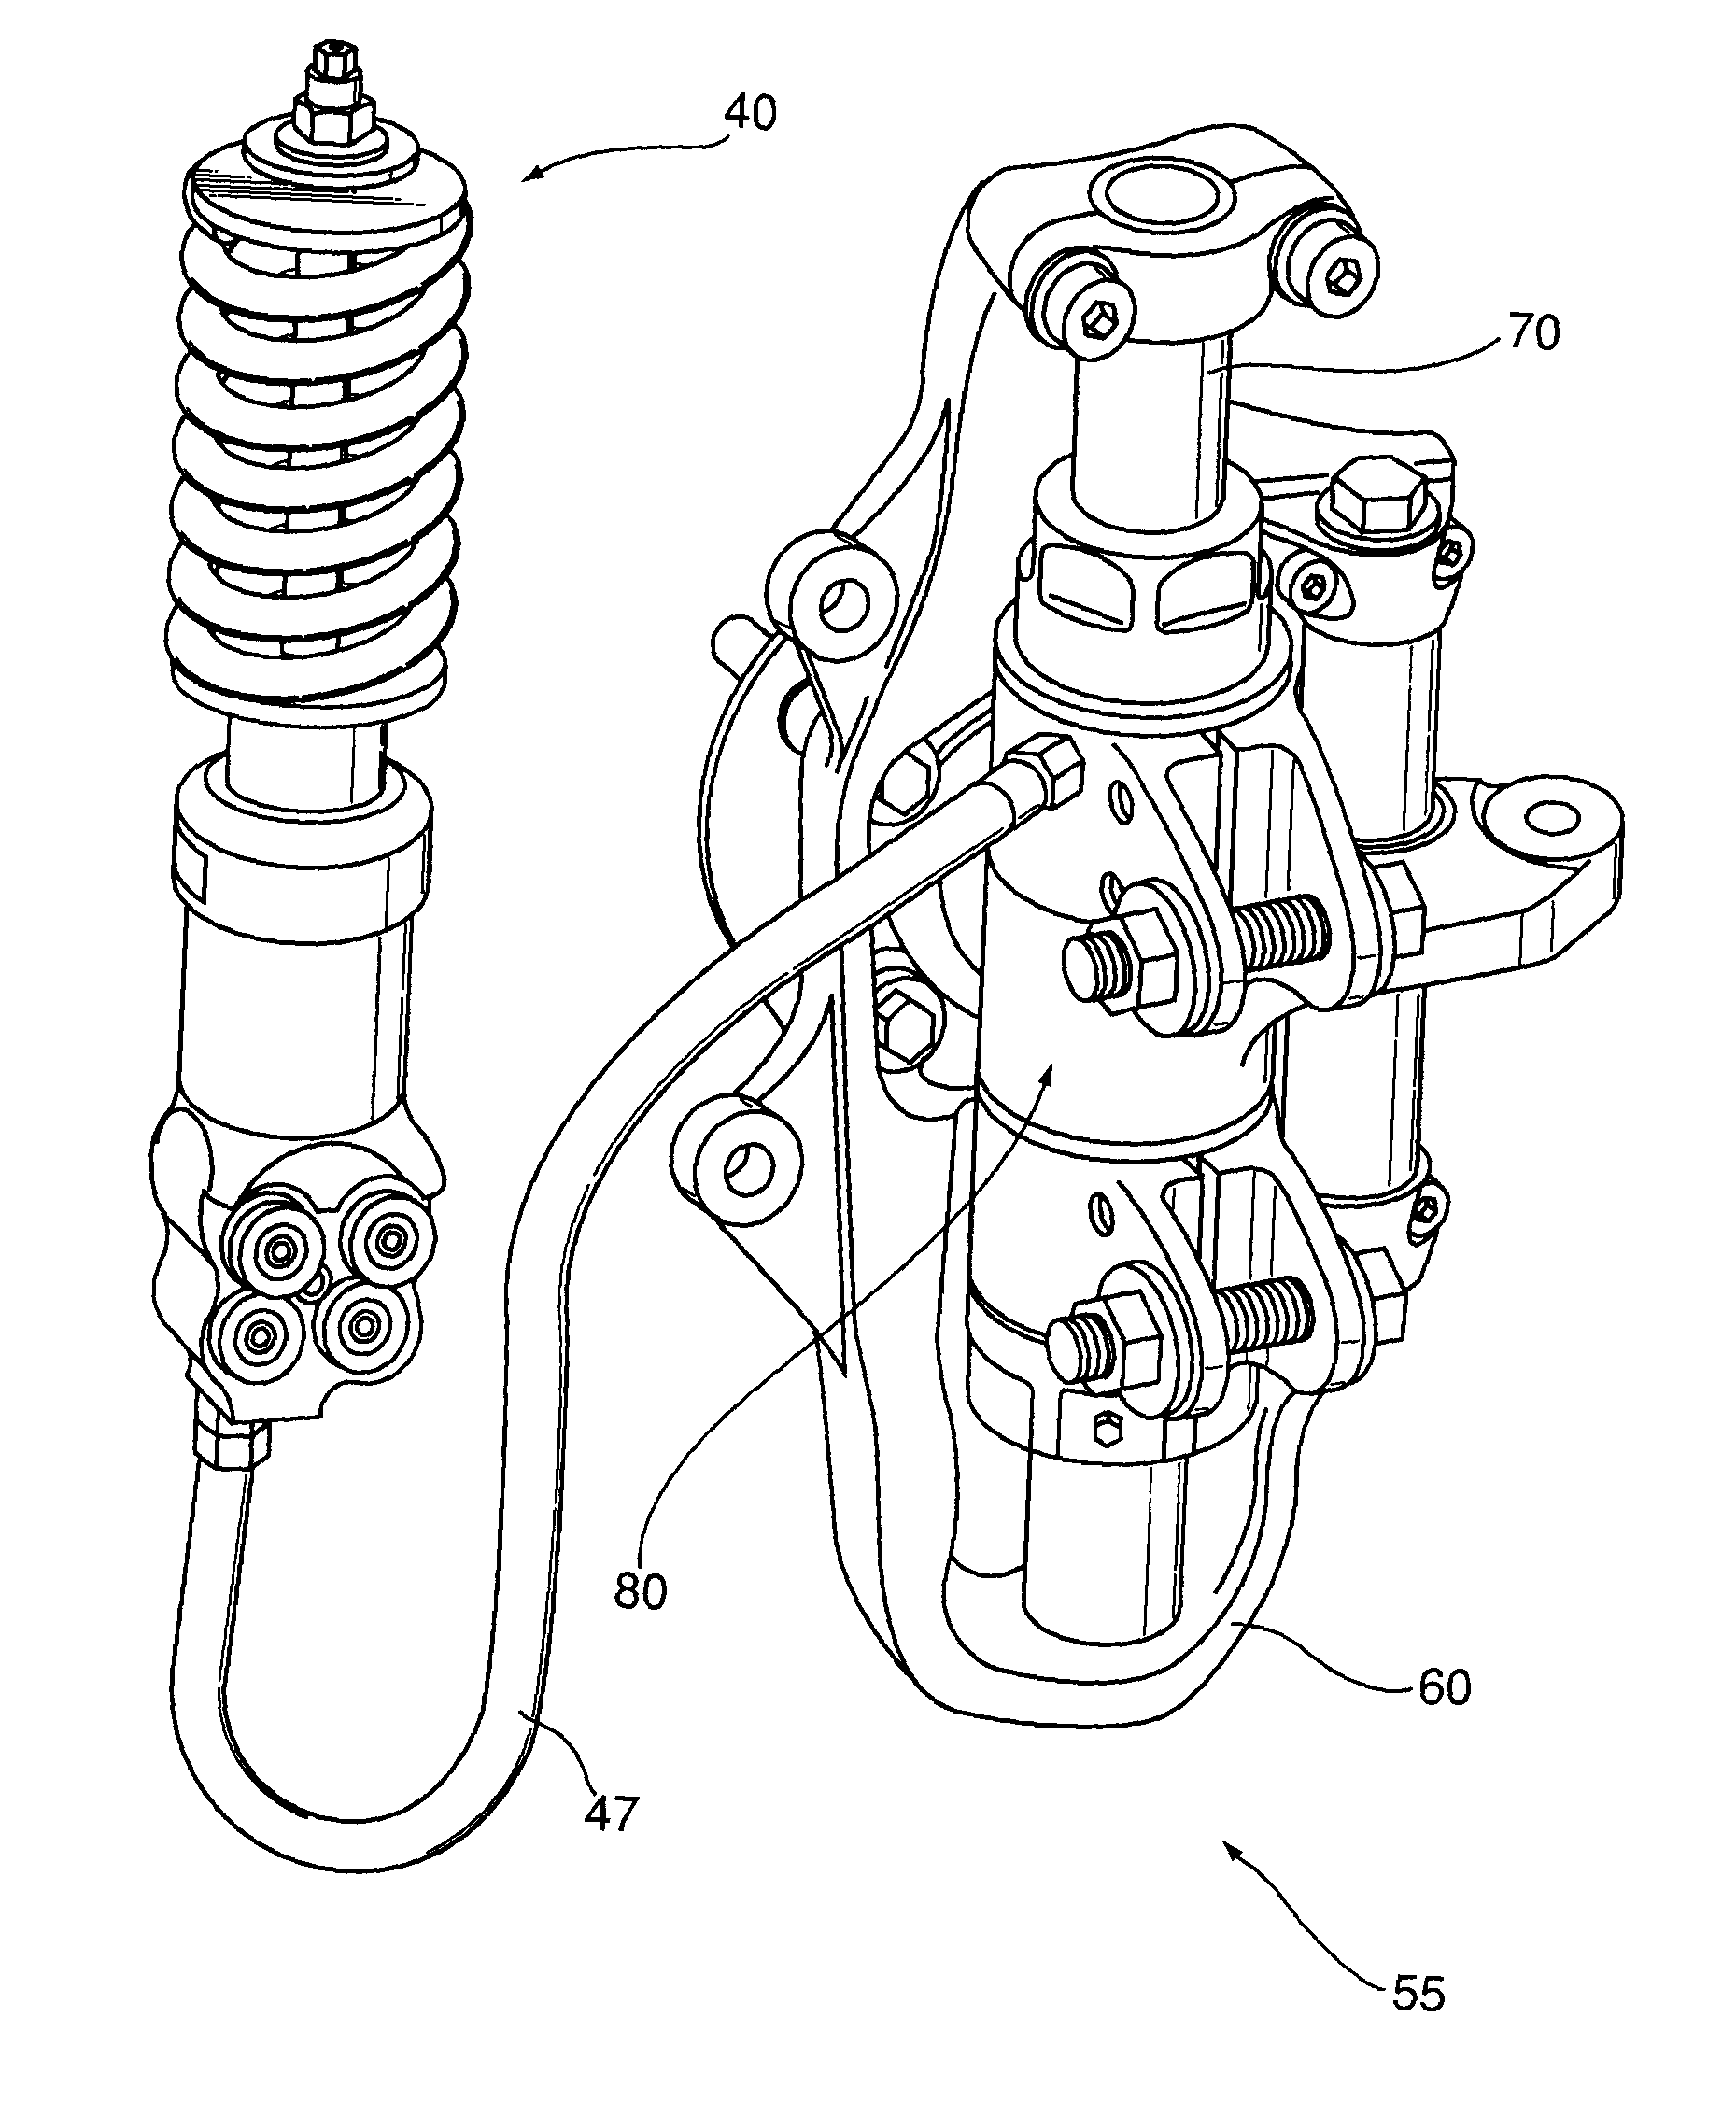 In-wheel suspension system with remote spring and damper means